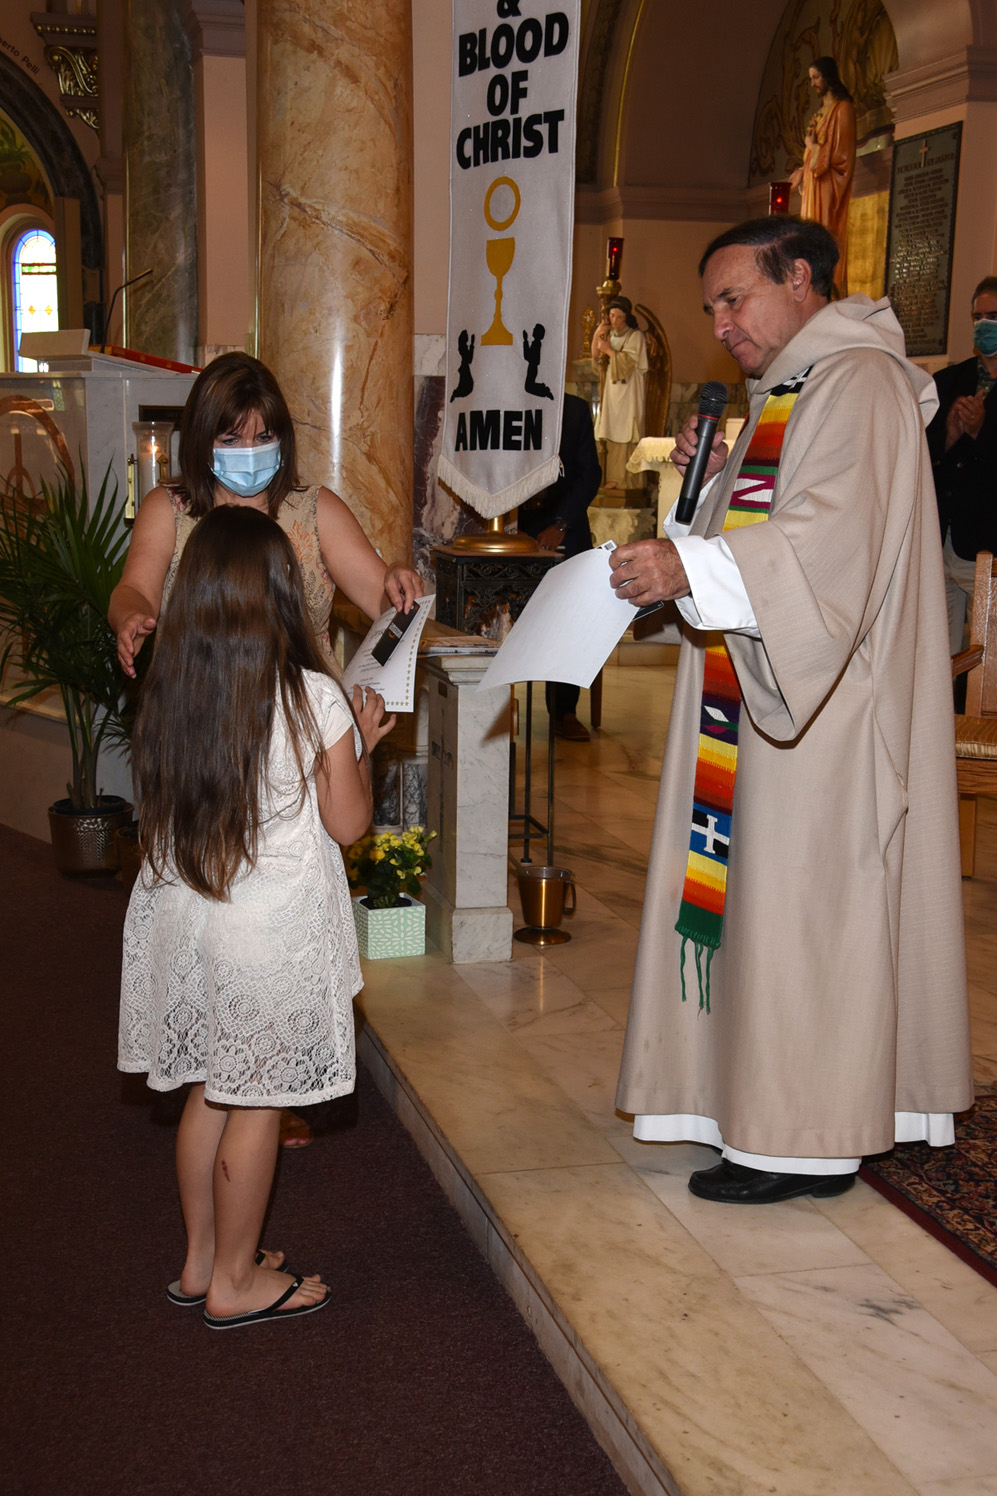 FIRST-COMMUNION-MAY-16-2021-141